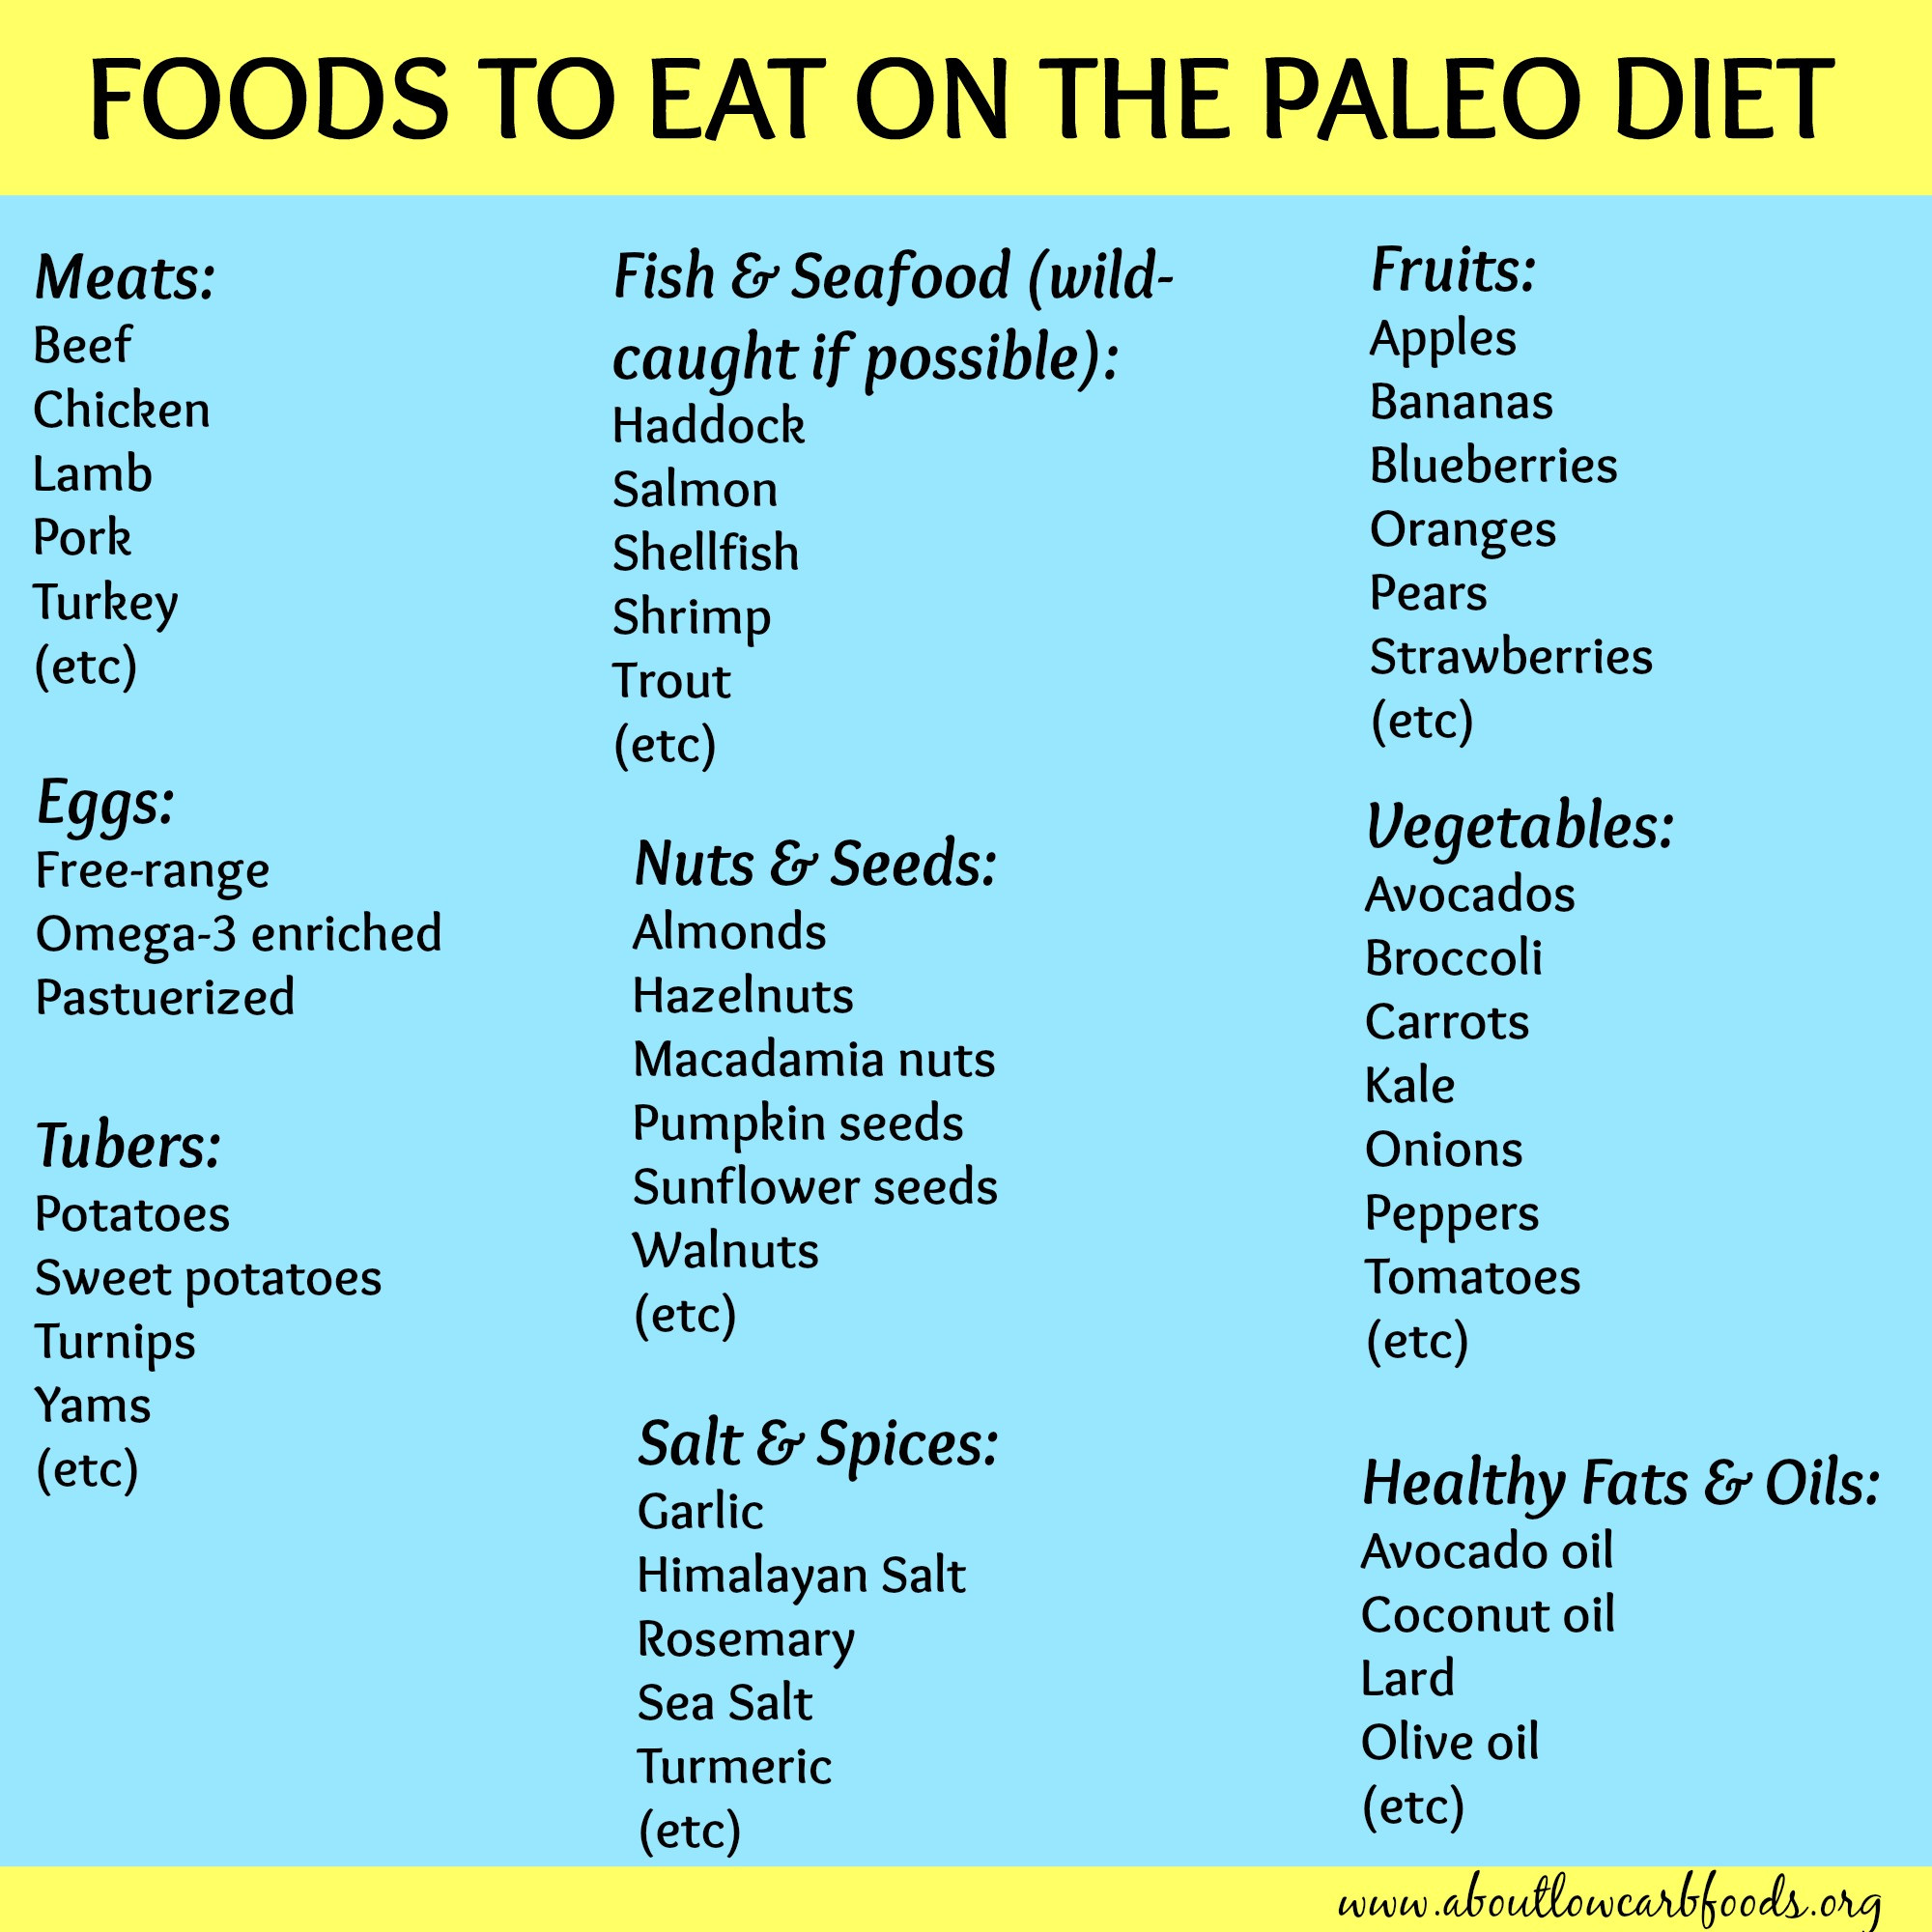 Paleo Diet Meal Plan
 Paleo Diet Meal Plan Why It’s So Popular About Low Carb